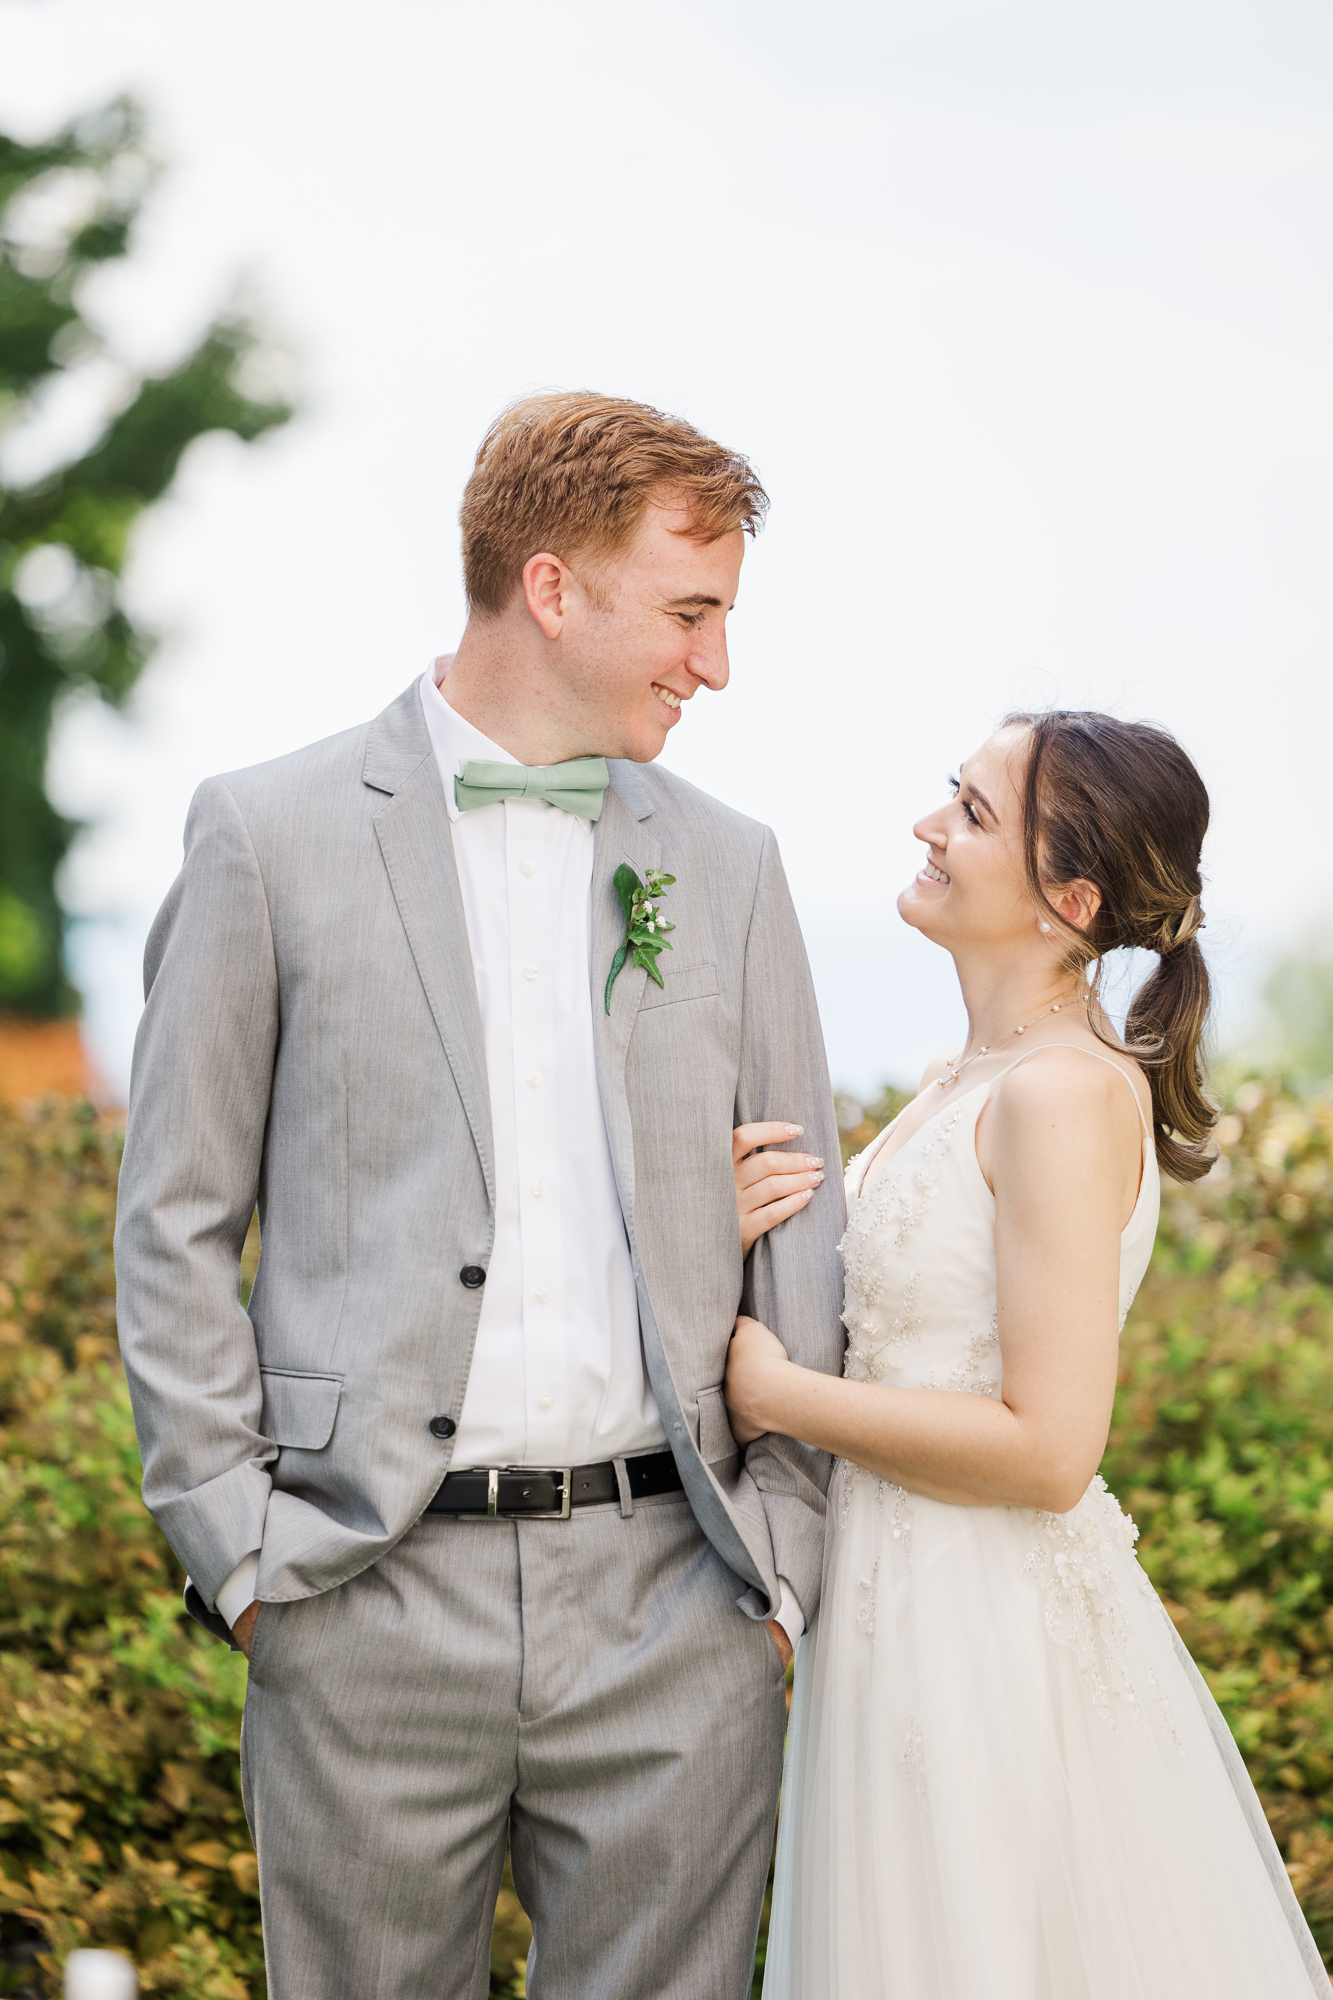 Sentimental Wedding at Briarcliff Manor in Summertime